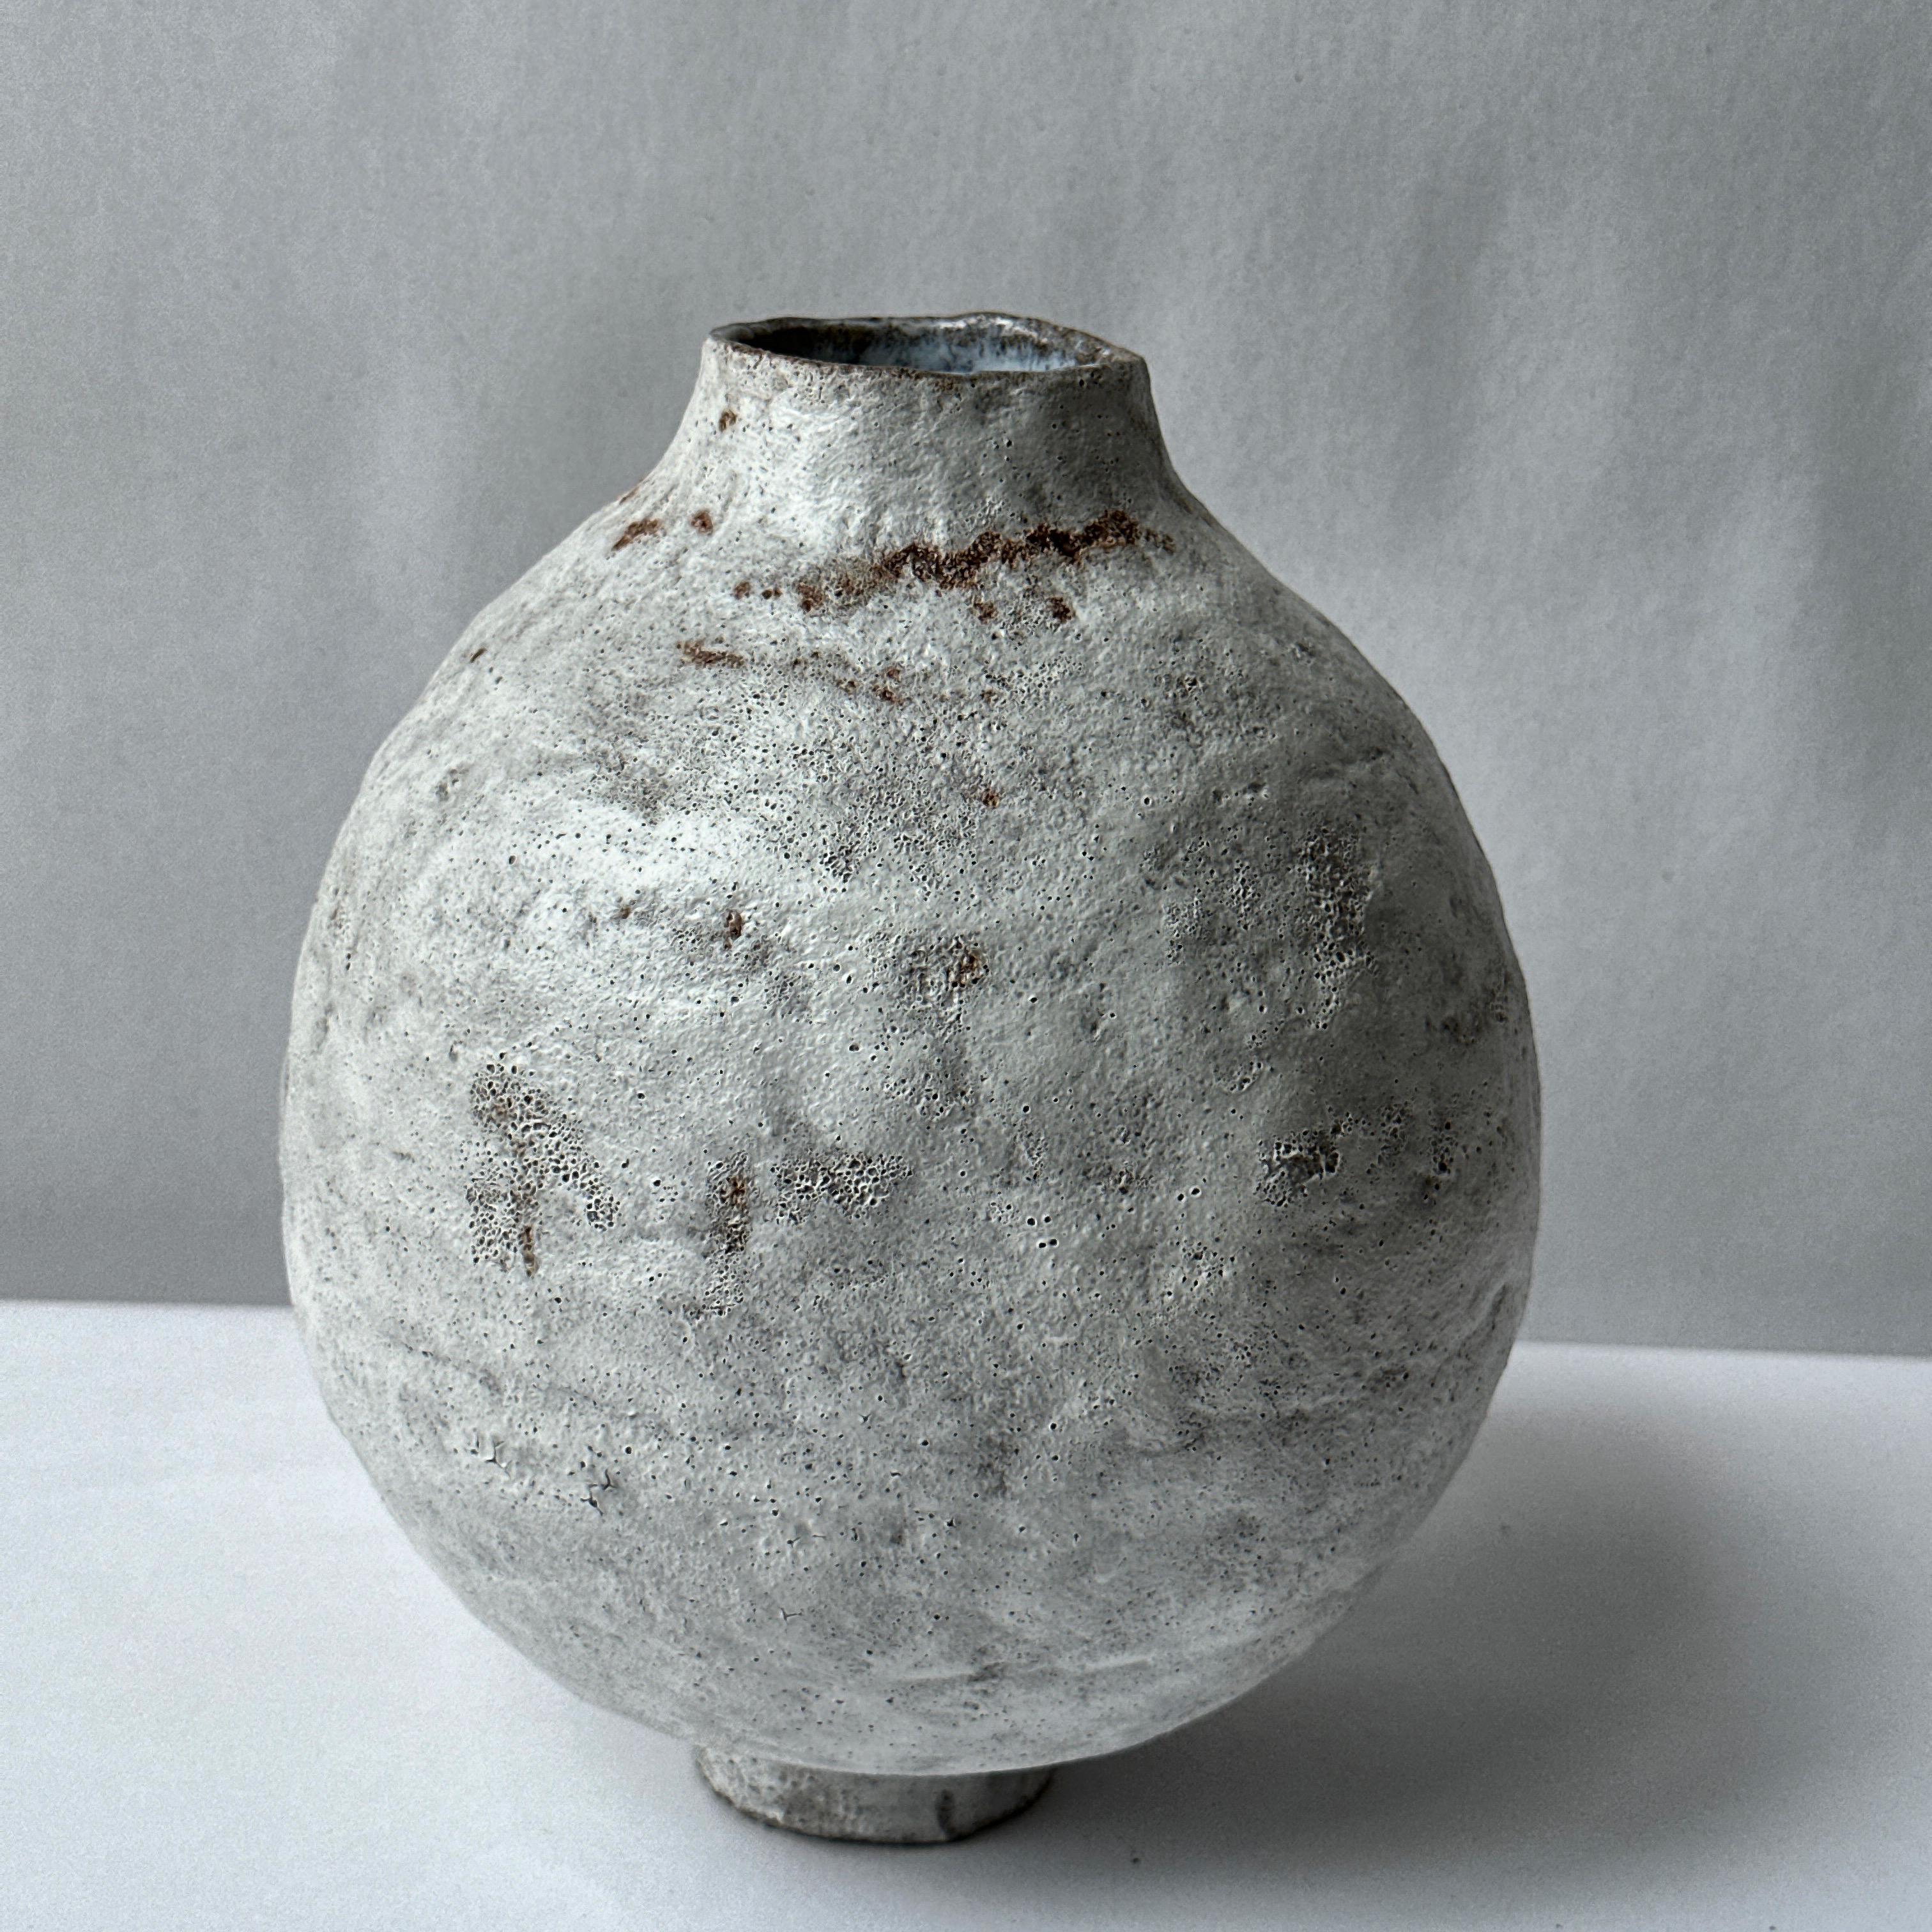 Grey Stoneware Coiled Moon Jar by Elena Vasilantonaki
Unique
Dimensions: ⌀ 23 x H 27 cm (Dimensions may vary)
Materials: Stoneware, Earthenware
Available finishes: Experimental Glazes, each one is unique

Growing up in Greece I was surrounded by